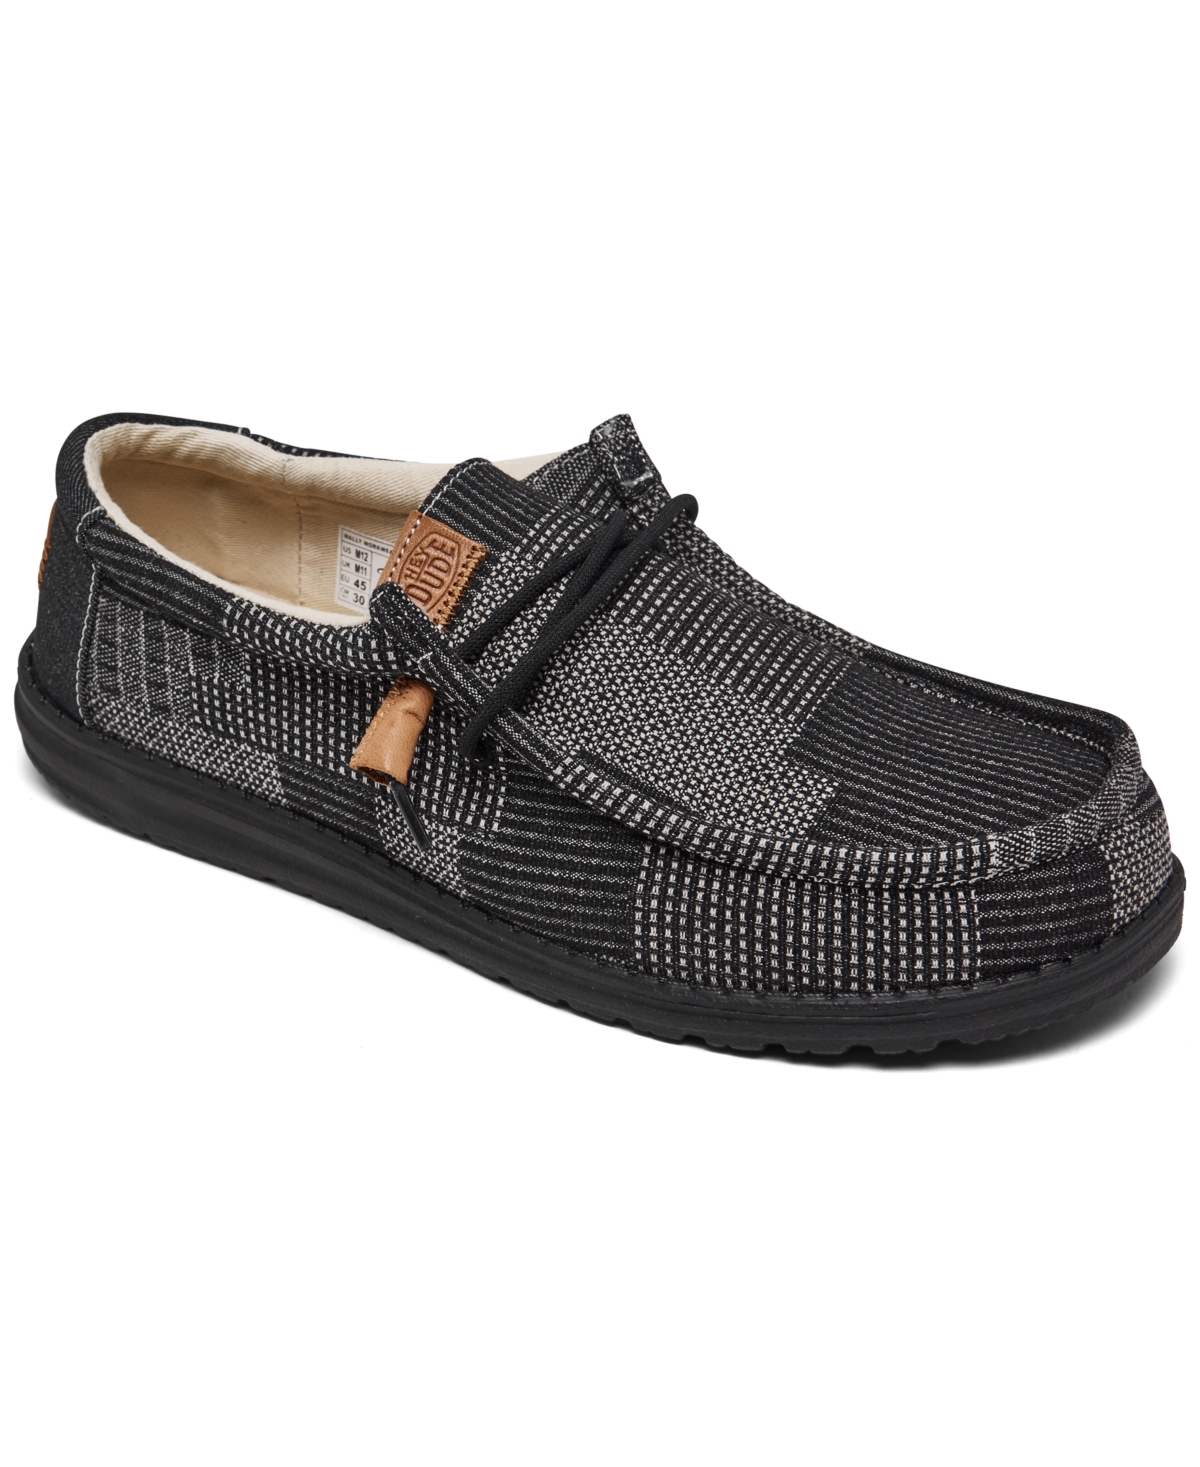 Men's Wally Work Wear Casual Moccasin Sneakers from Finish Line - Black Patchwork